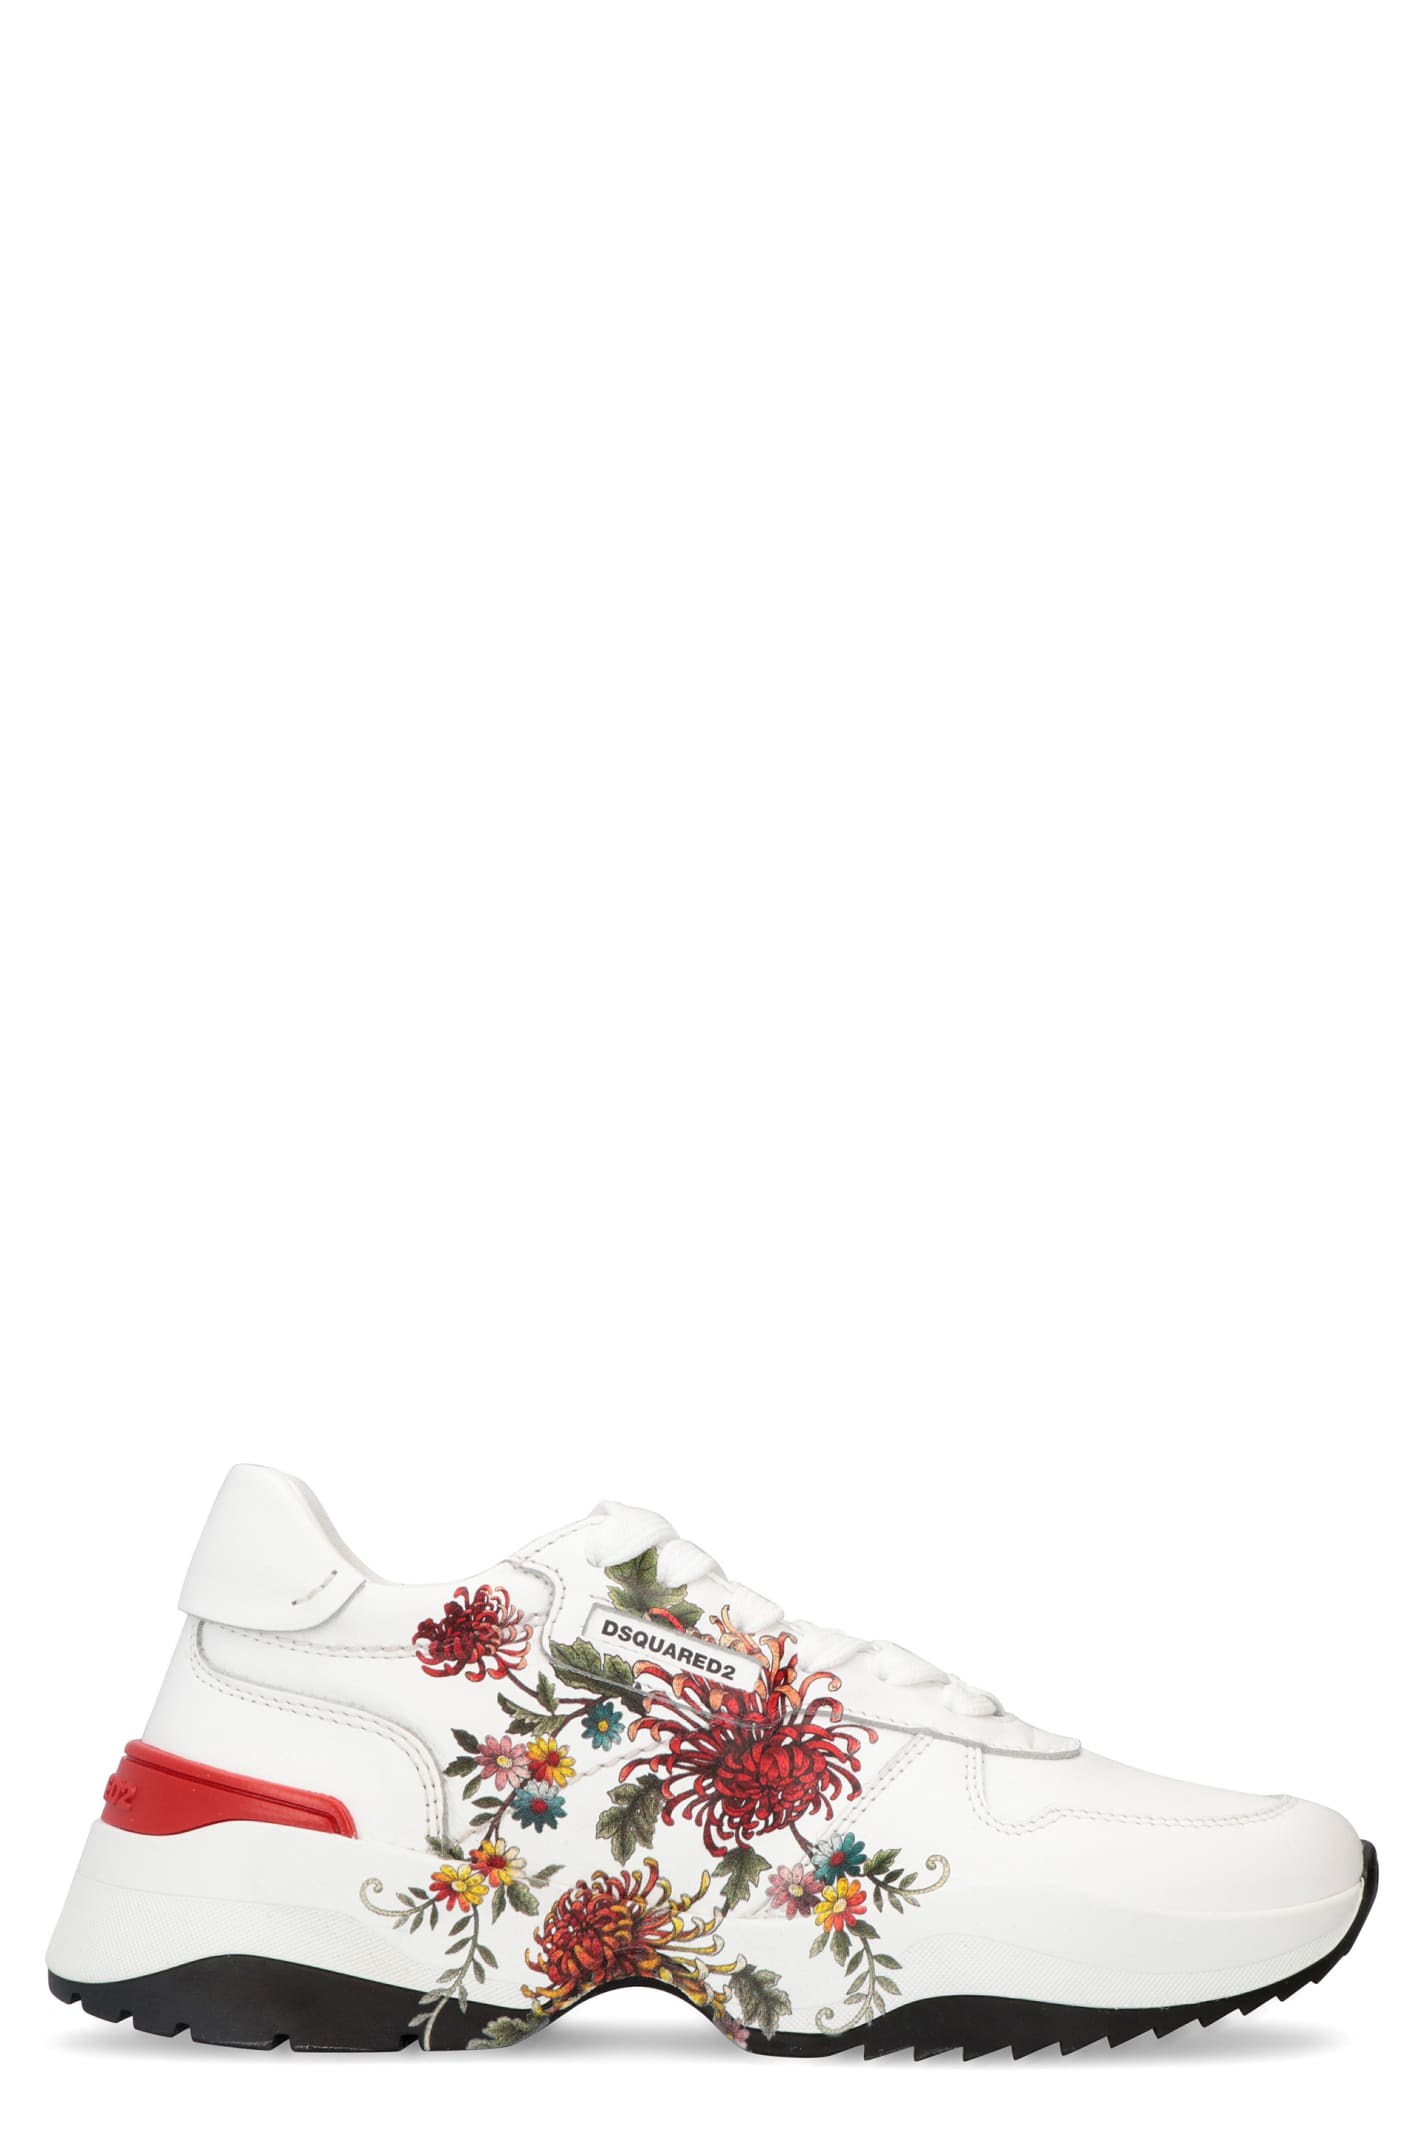 DSQUARED2 LEATHER LOW-TOP SNEAKERS,11319304